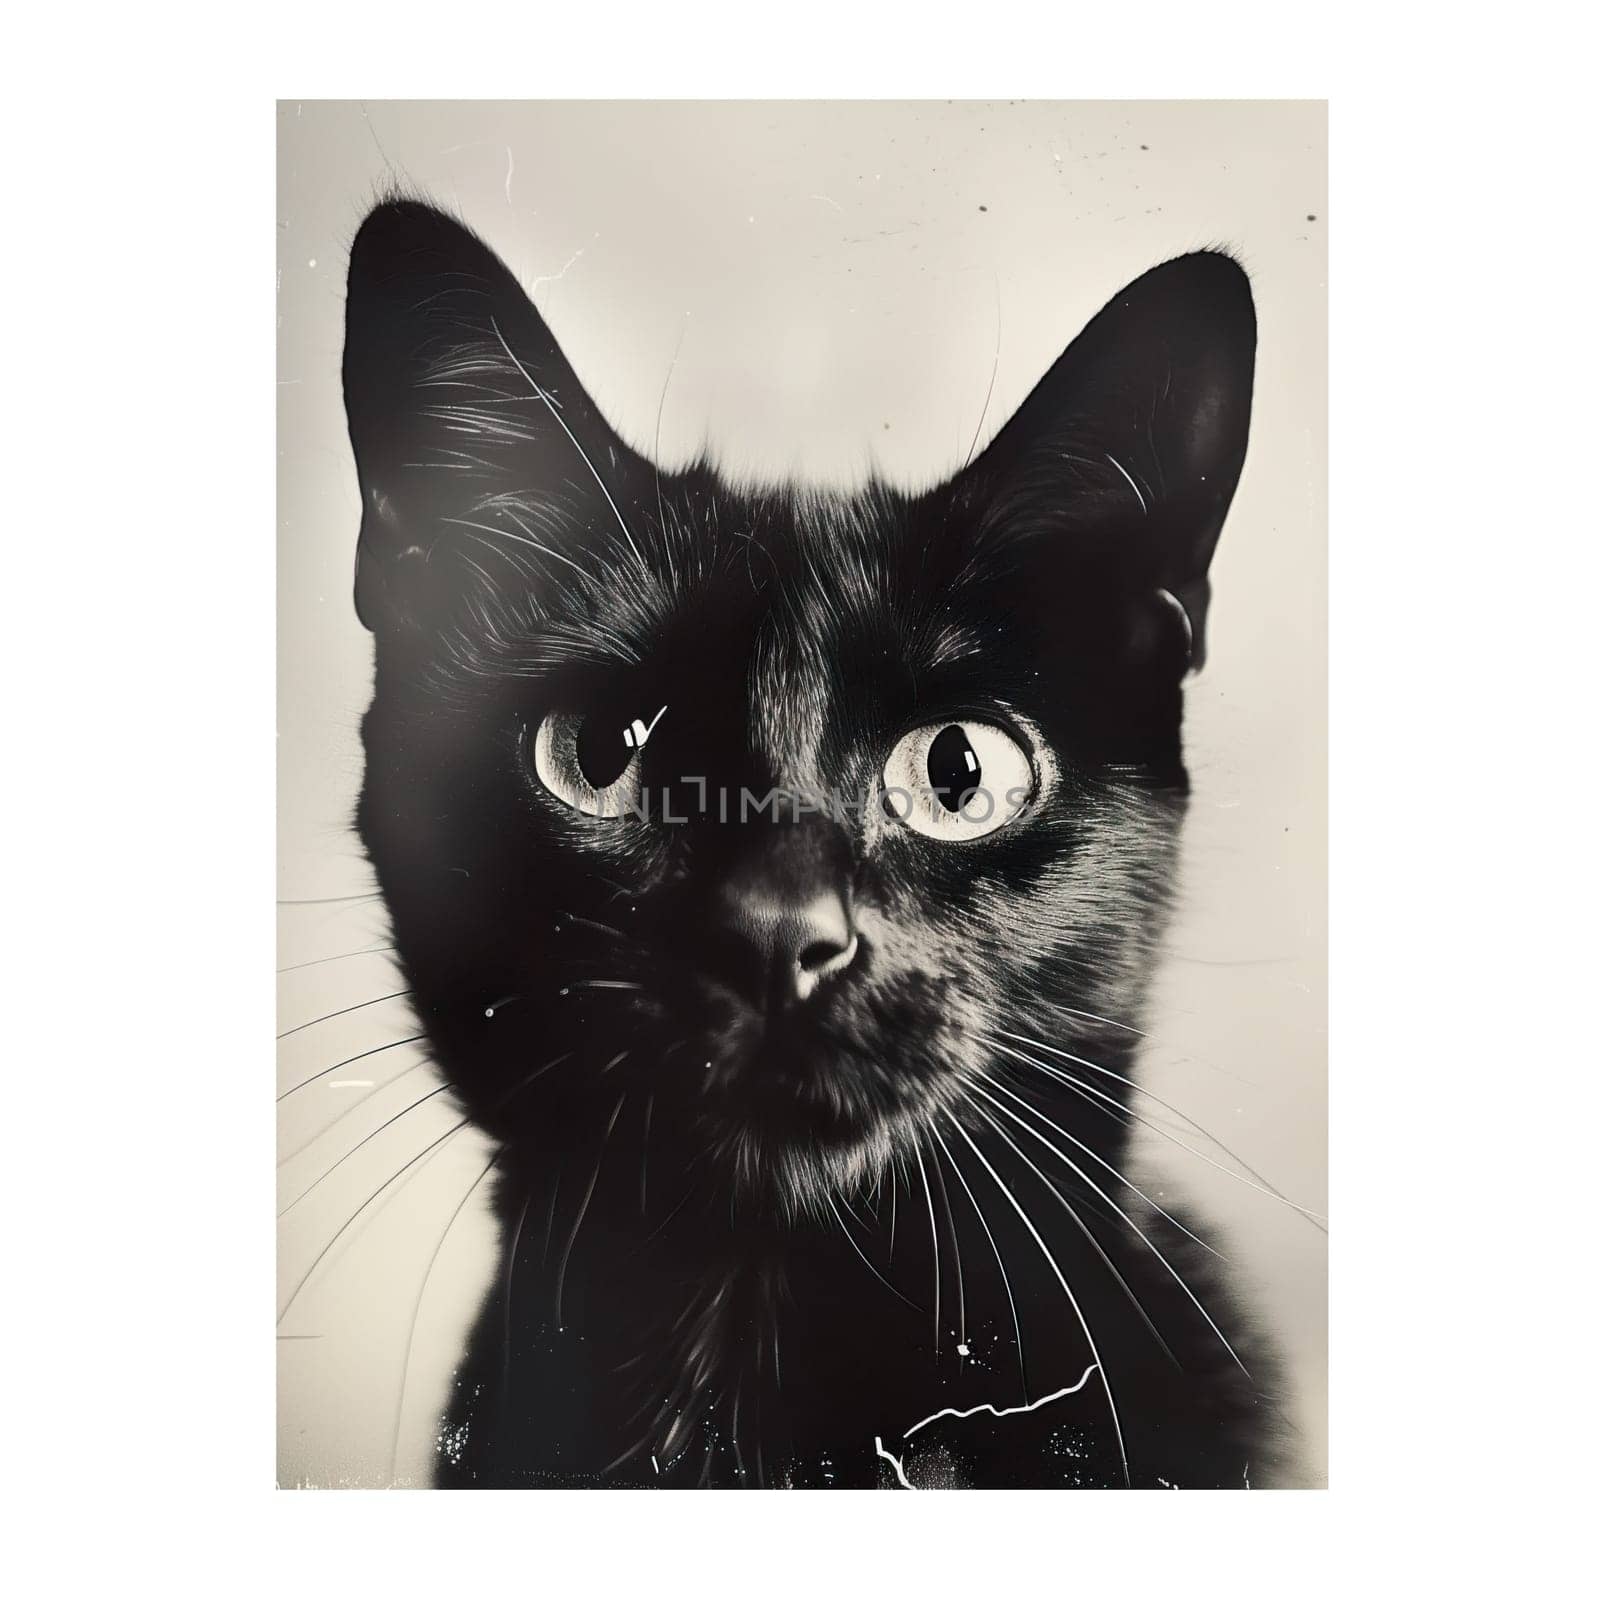 Monochrome vintage photo of halloween Cat cut out image by Dustick